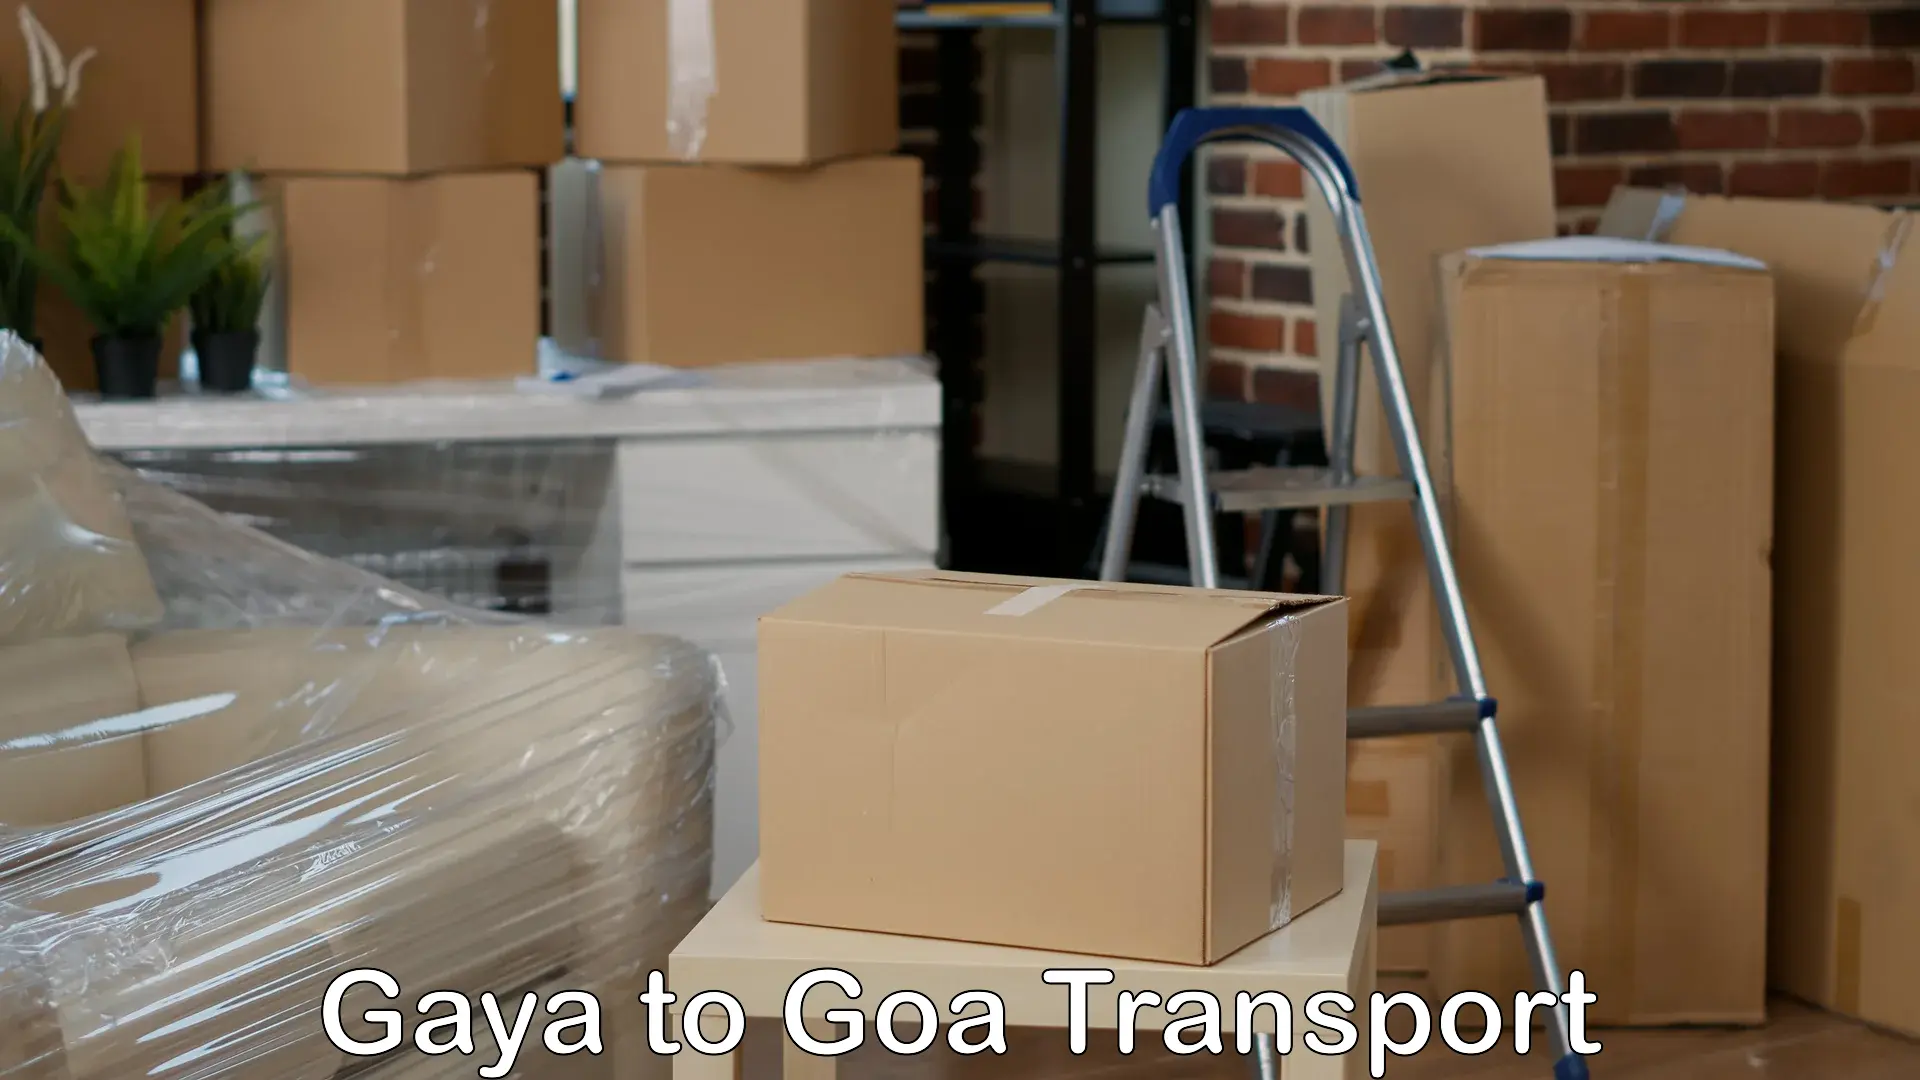 Transport bike from one state to another Gaya to South Goa